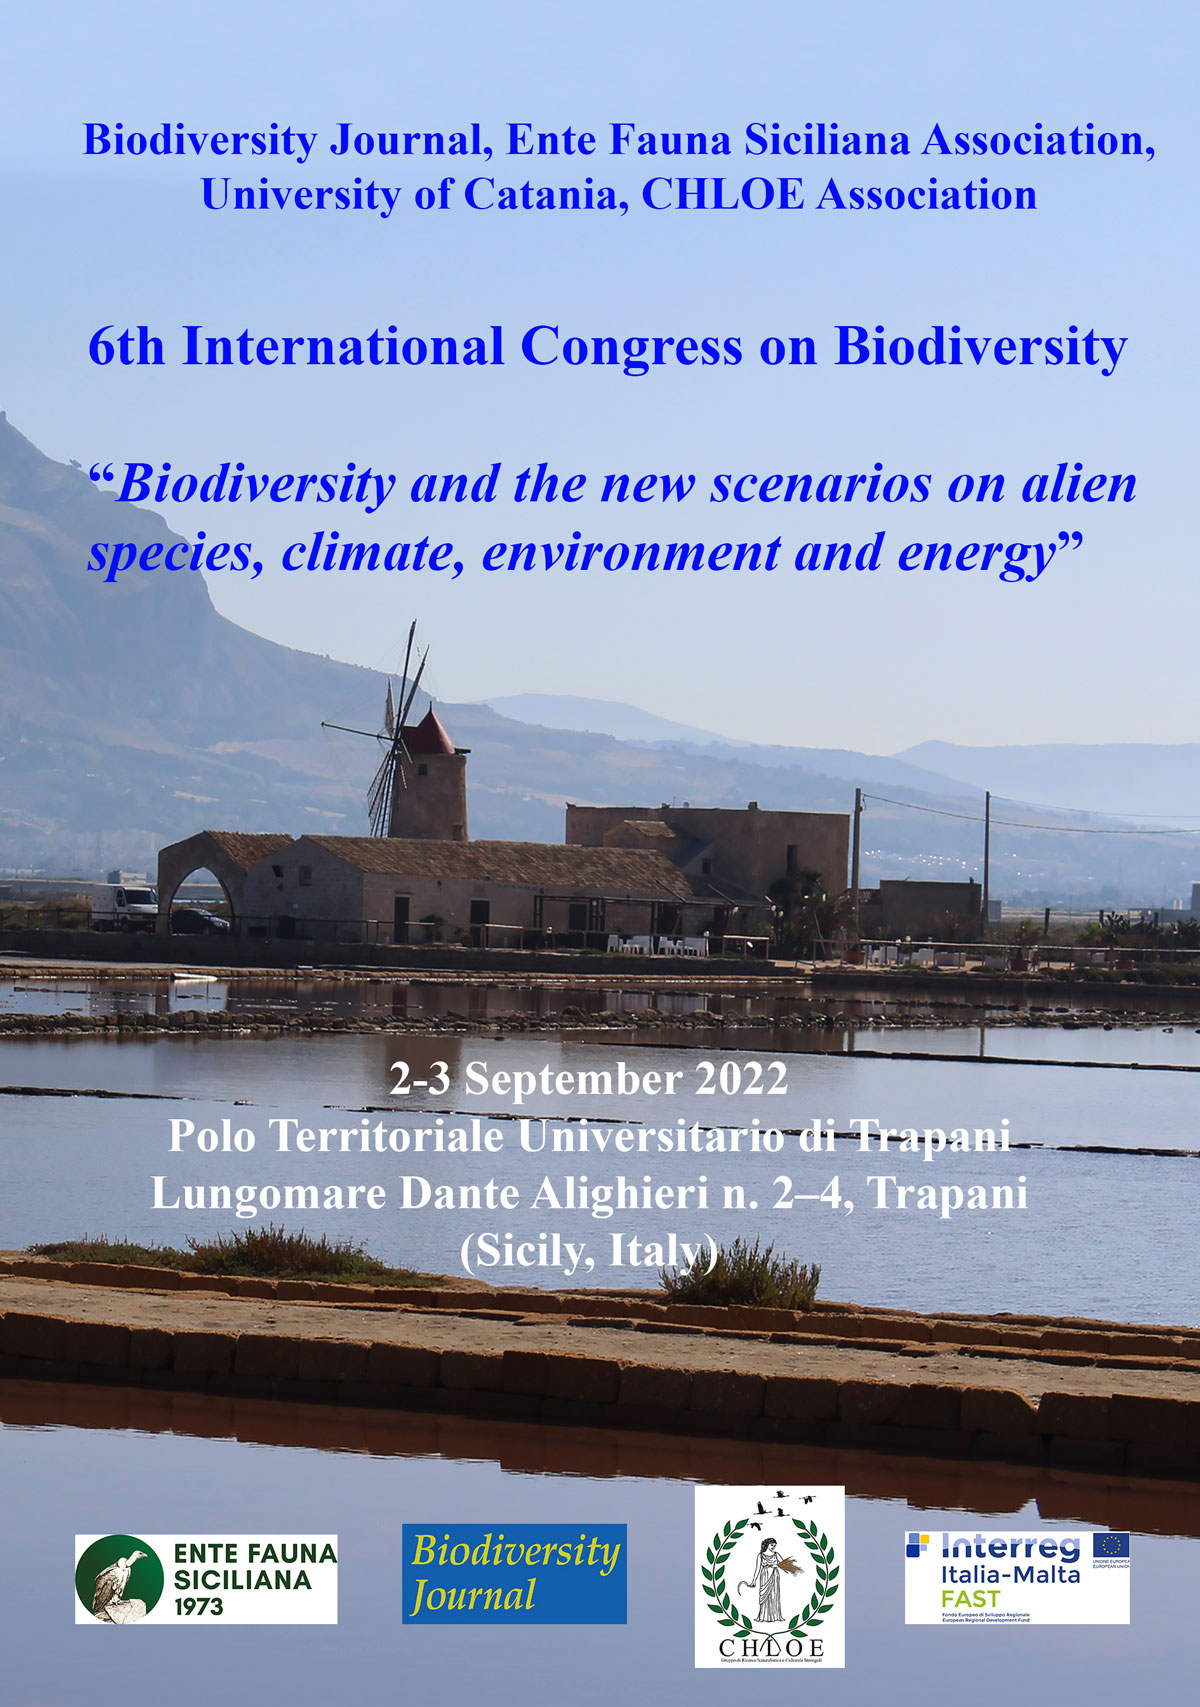 6th International Congress on Biodiversity “Biodiversity and the new scenarios on alien species, climate, environment and energy”